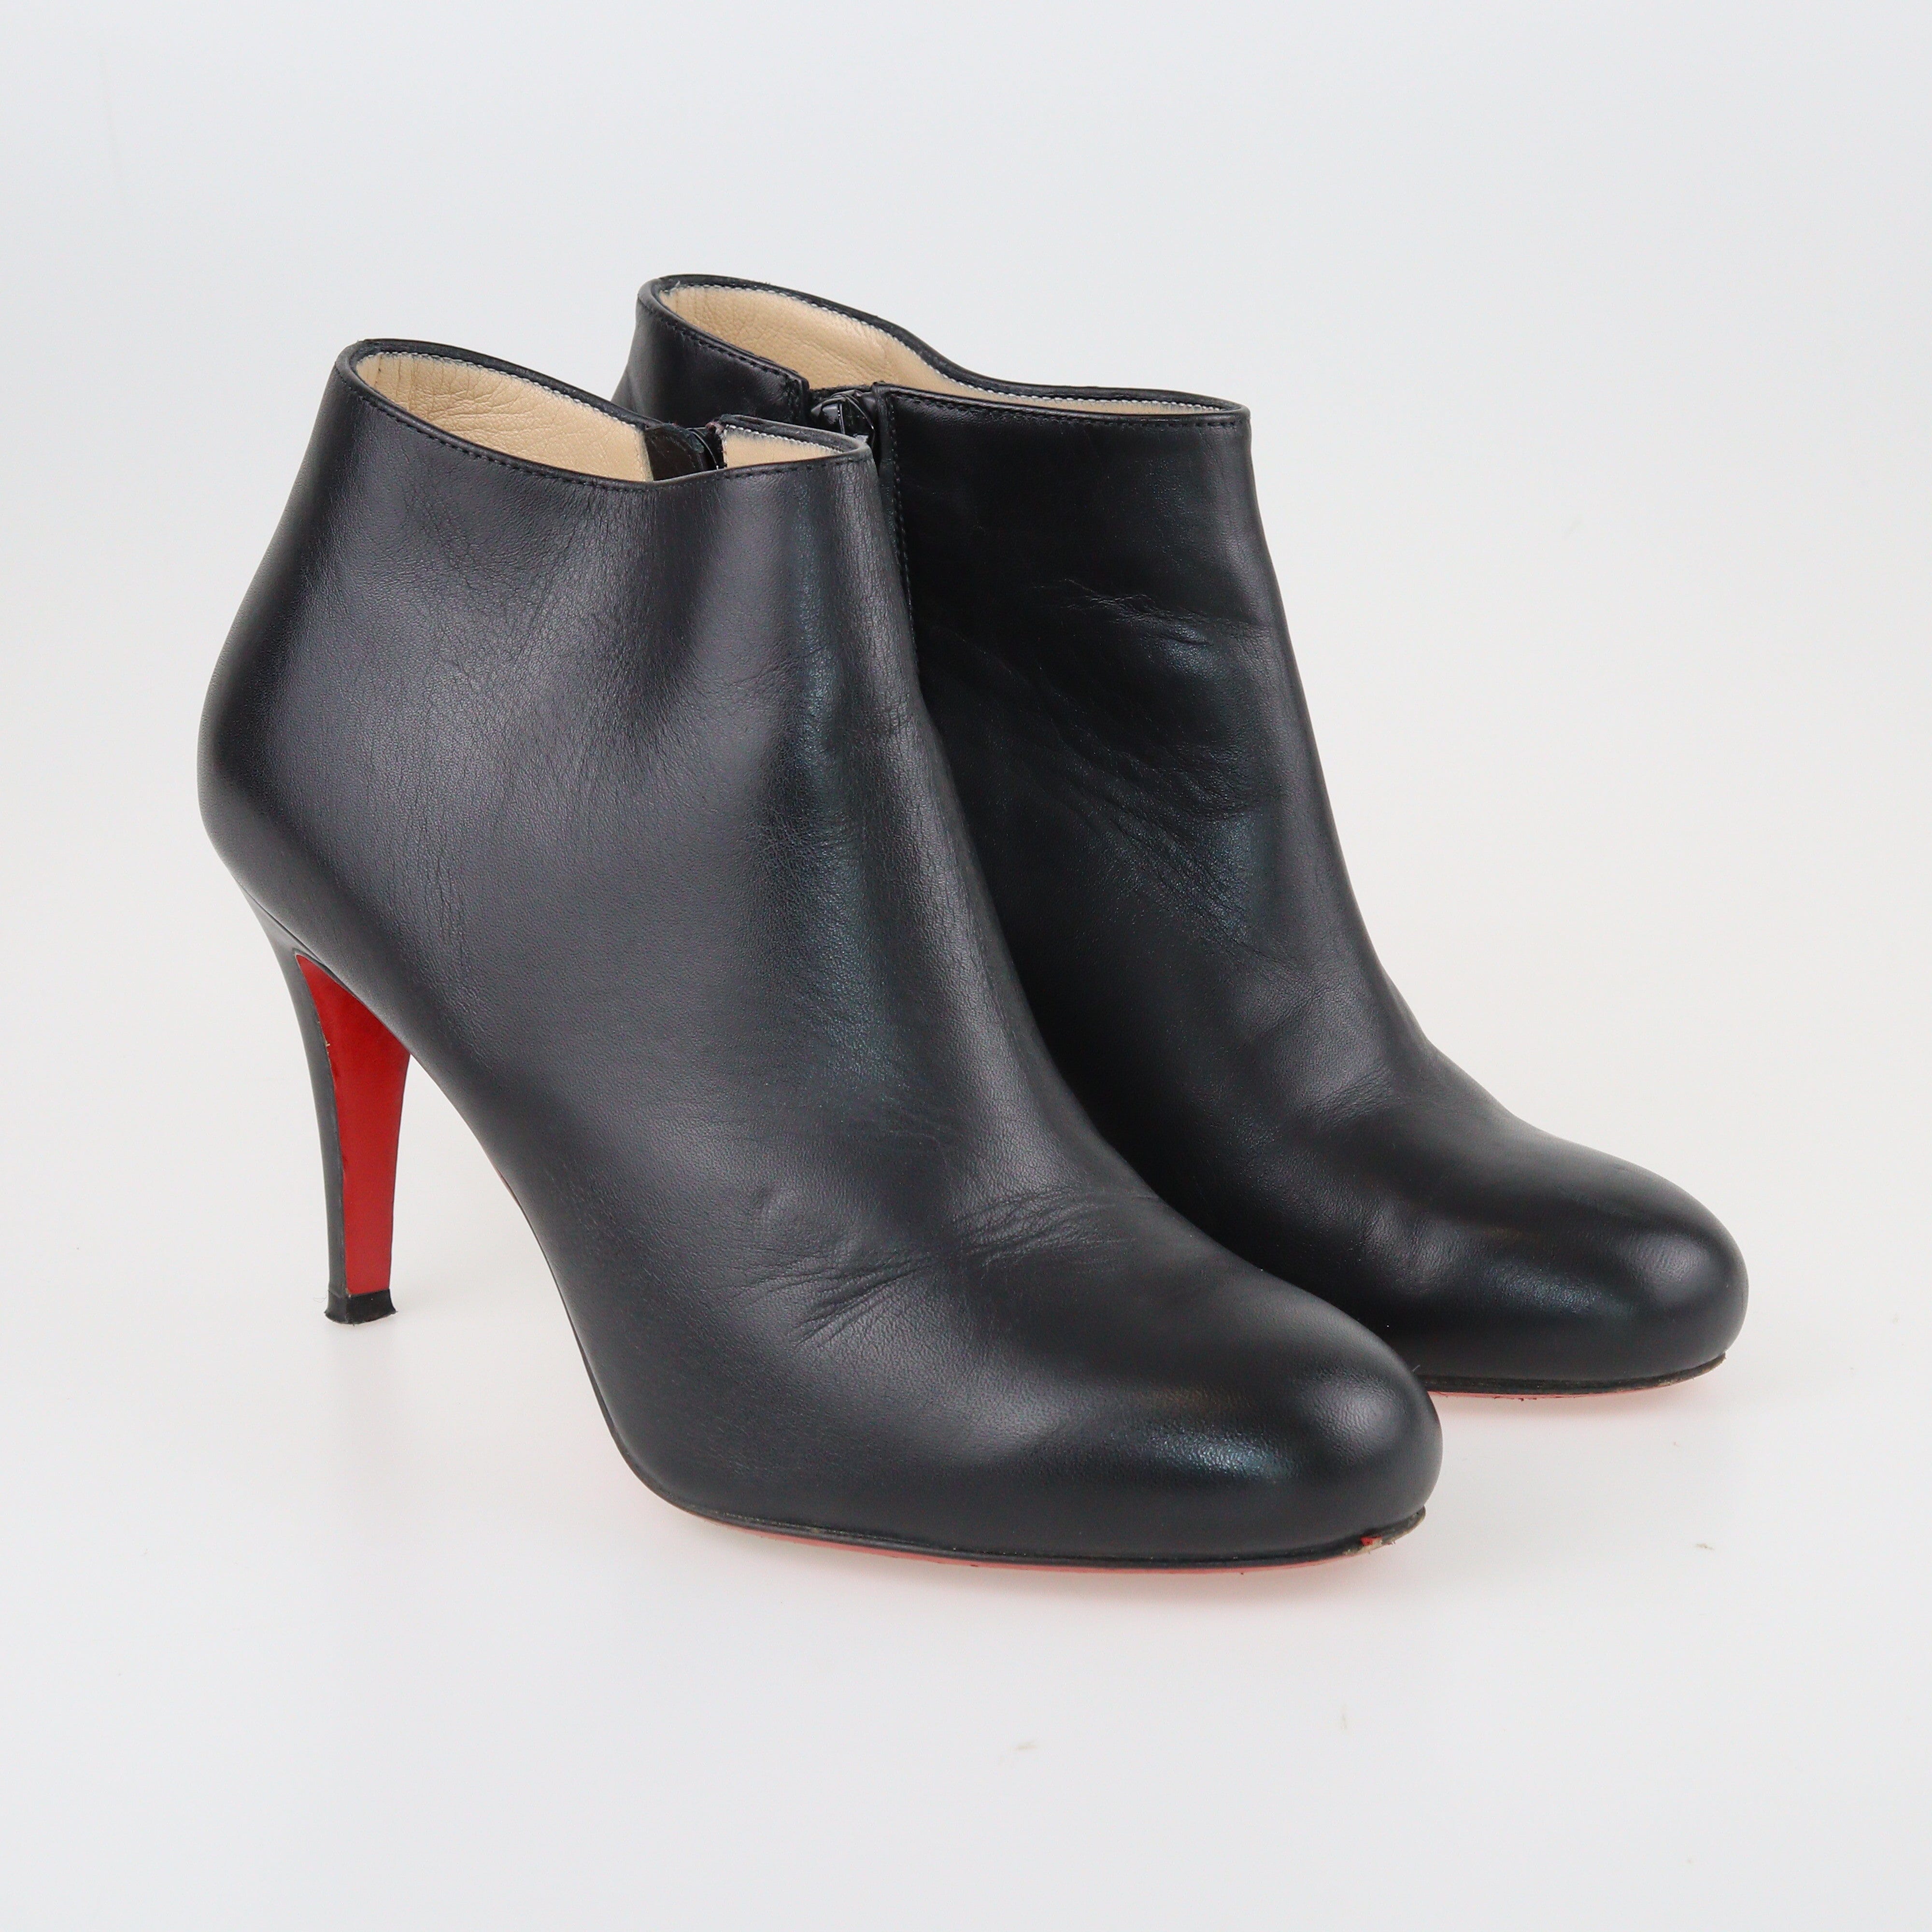 Black Belle Ankle Boots Shoes Christian Louboutin 